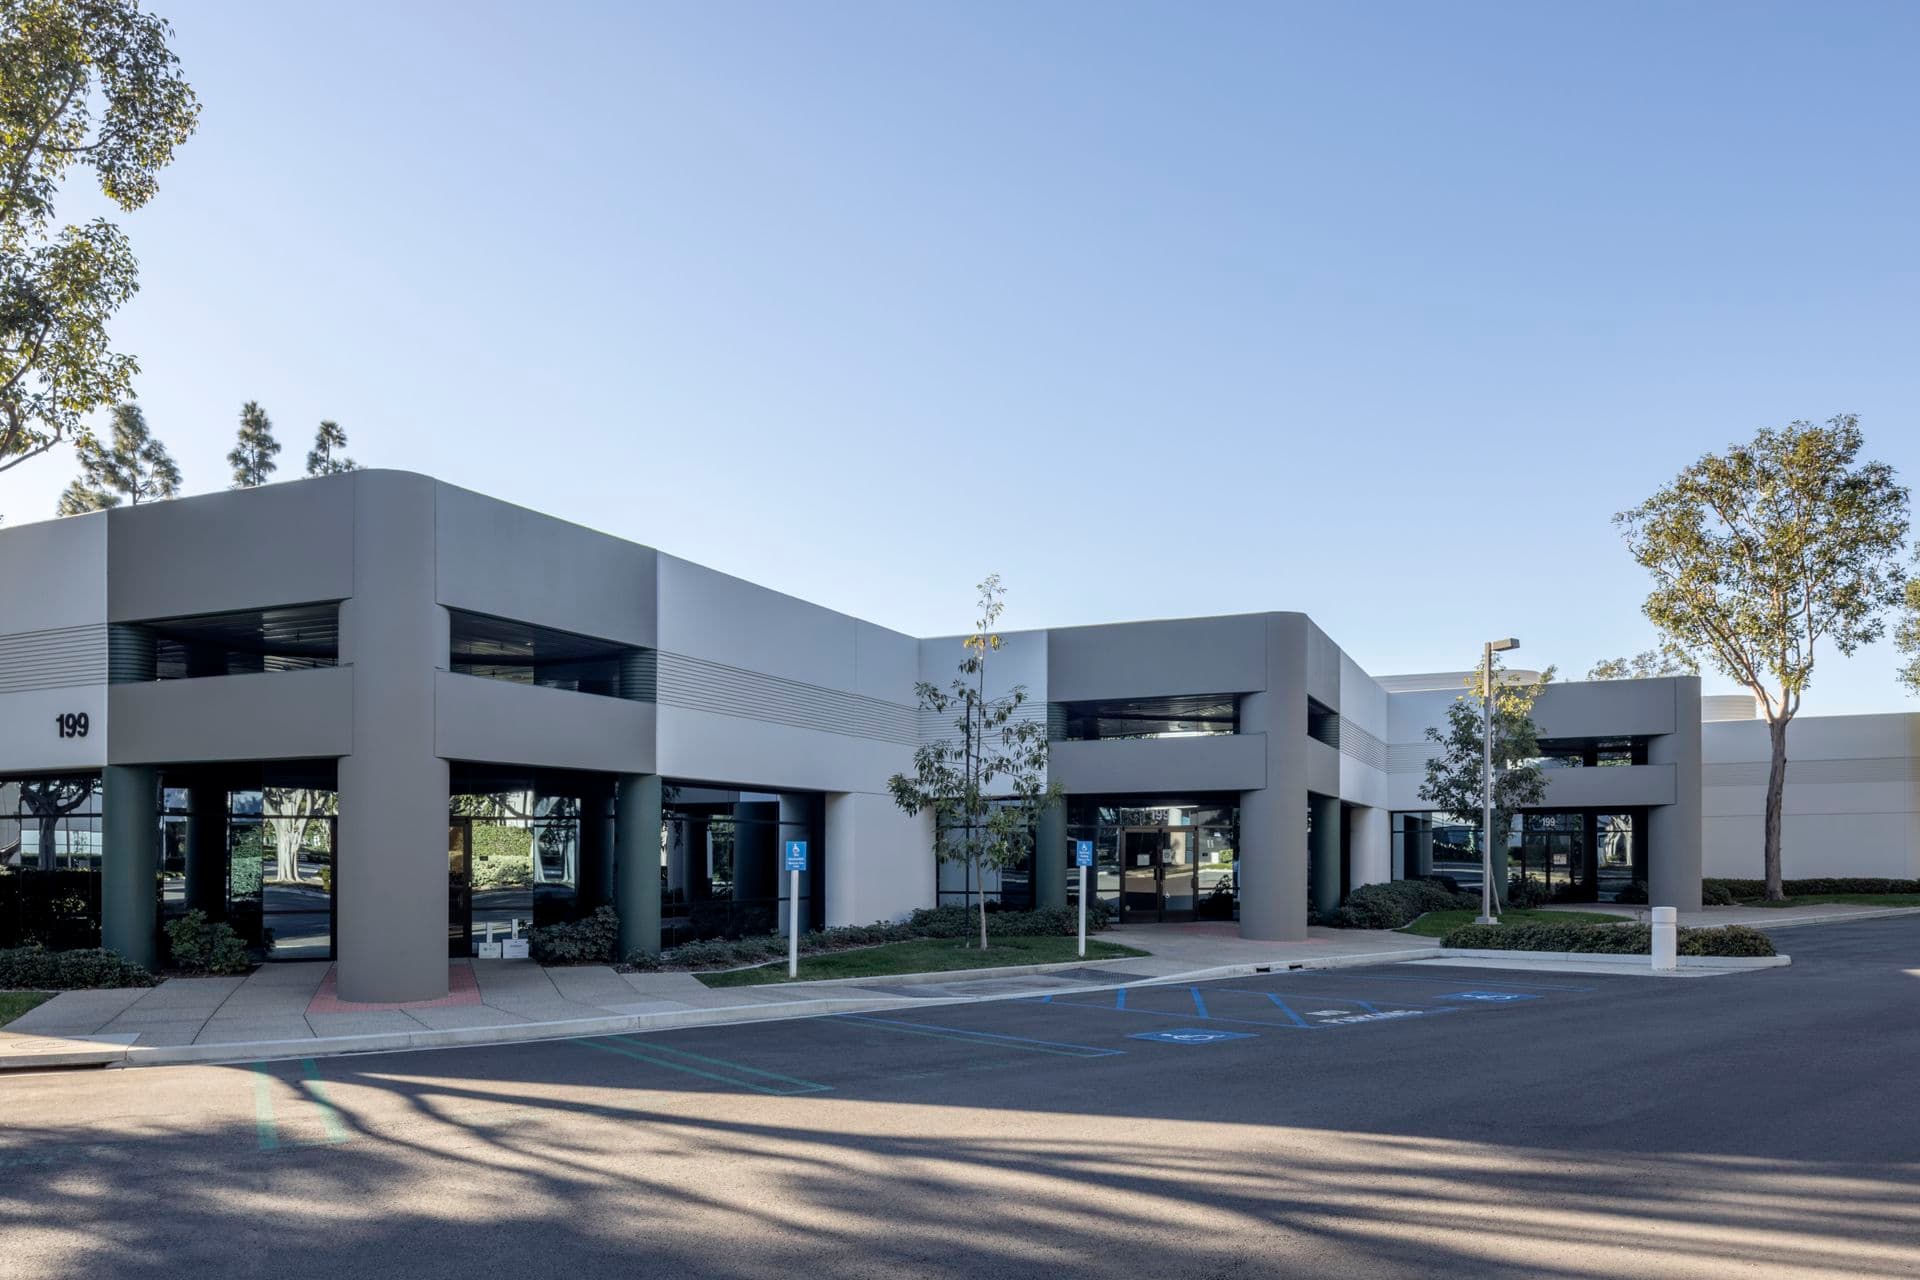 Exterior view of 199 Technology Drive in Irvine, CA.